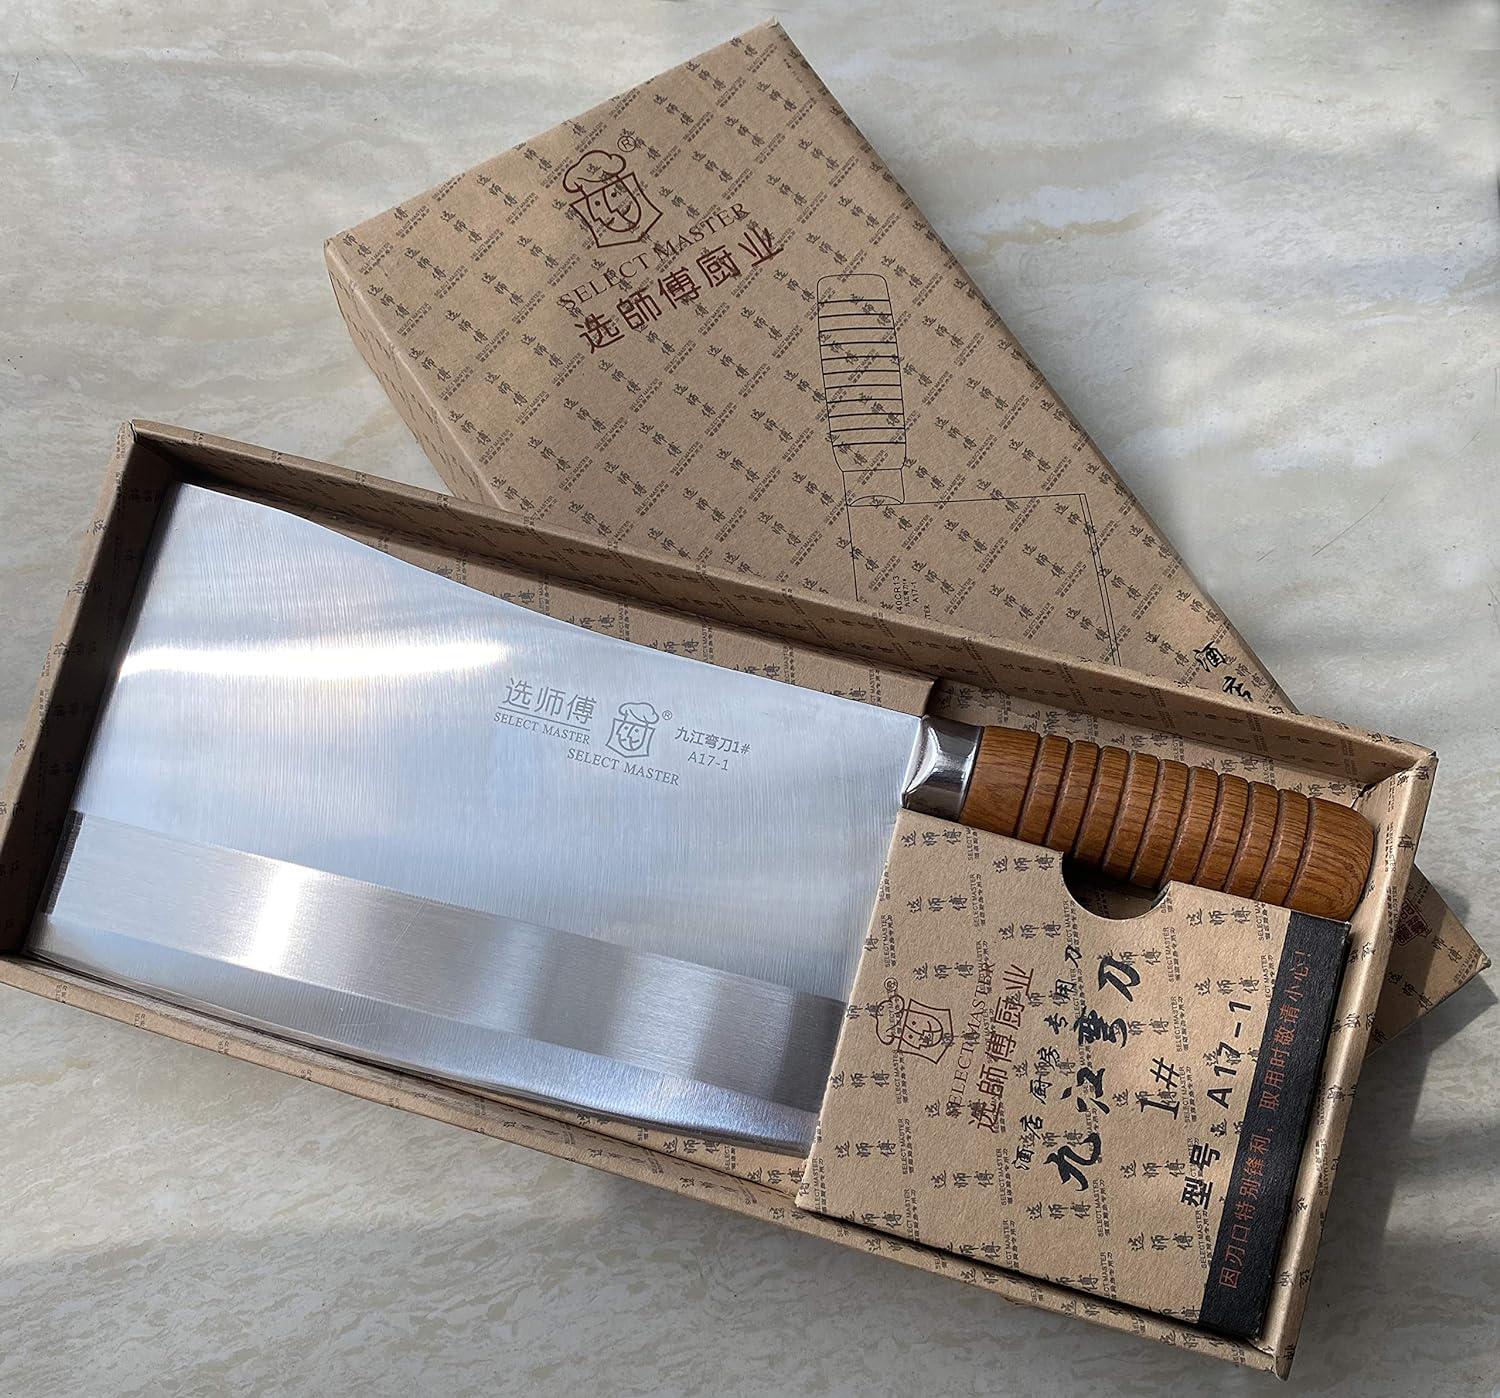  Vegetable Cleaver Chinese Chef Knife Kitchen Meat Cleaver - 9  Stainless Steel Chopping Knife for Meat Cutting - Safe Non-stick Coating  Blade - Full Tang Anti-Slip Pear Wooden Handle : Home